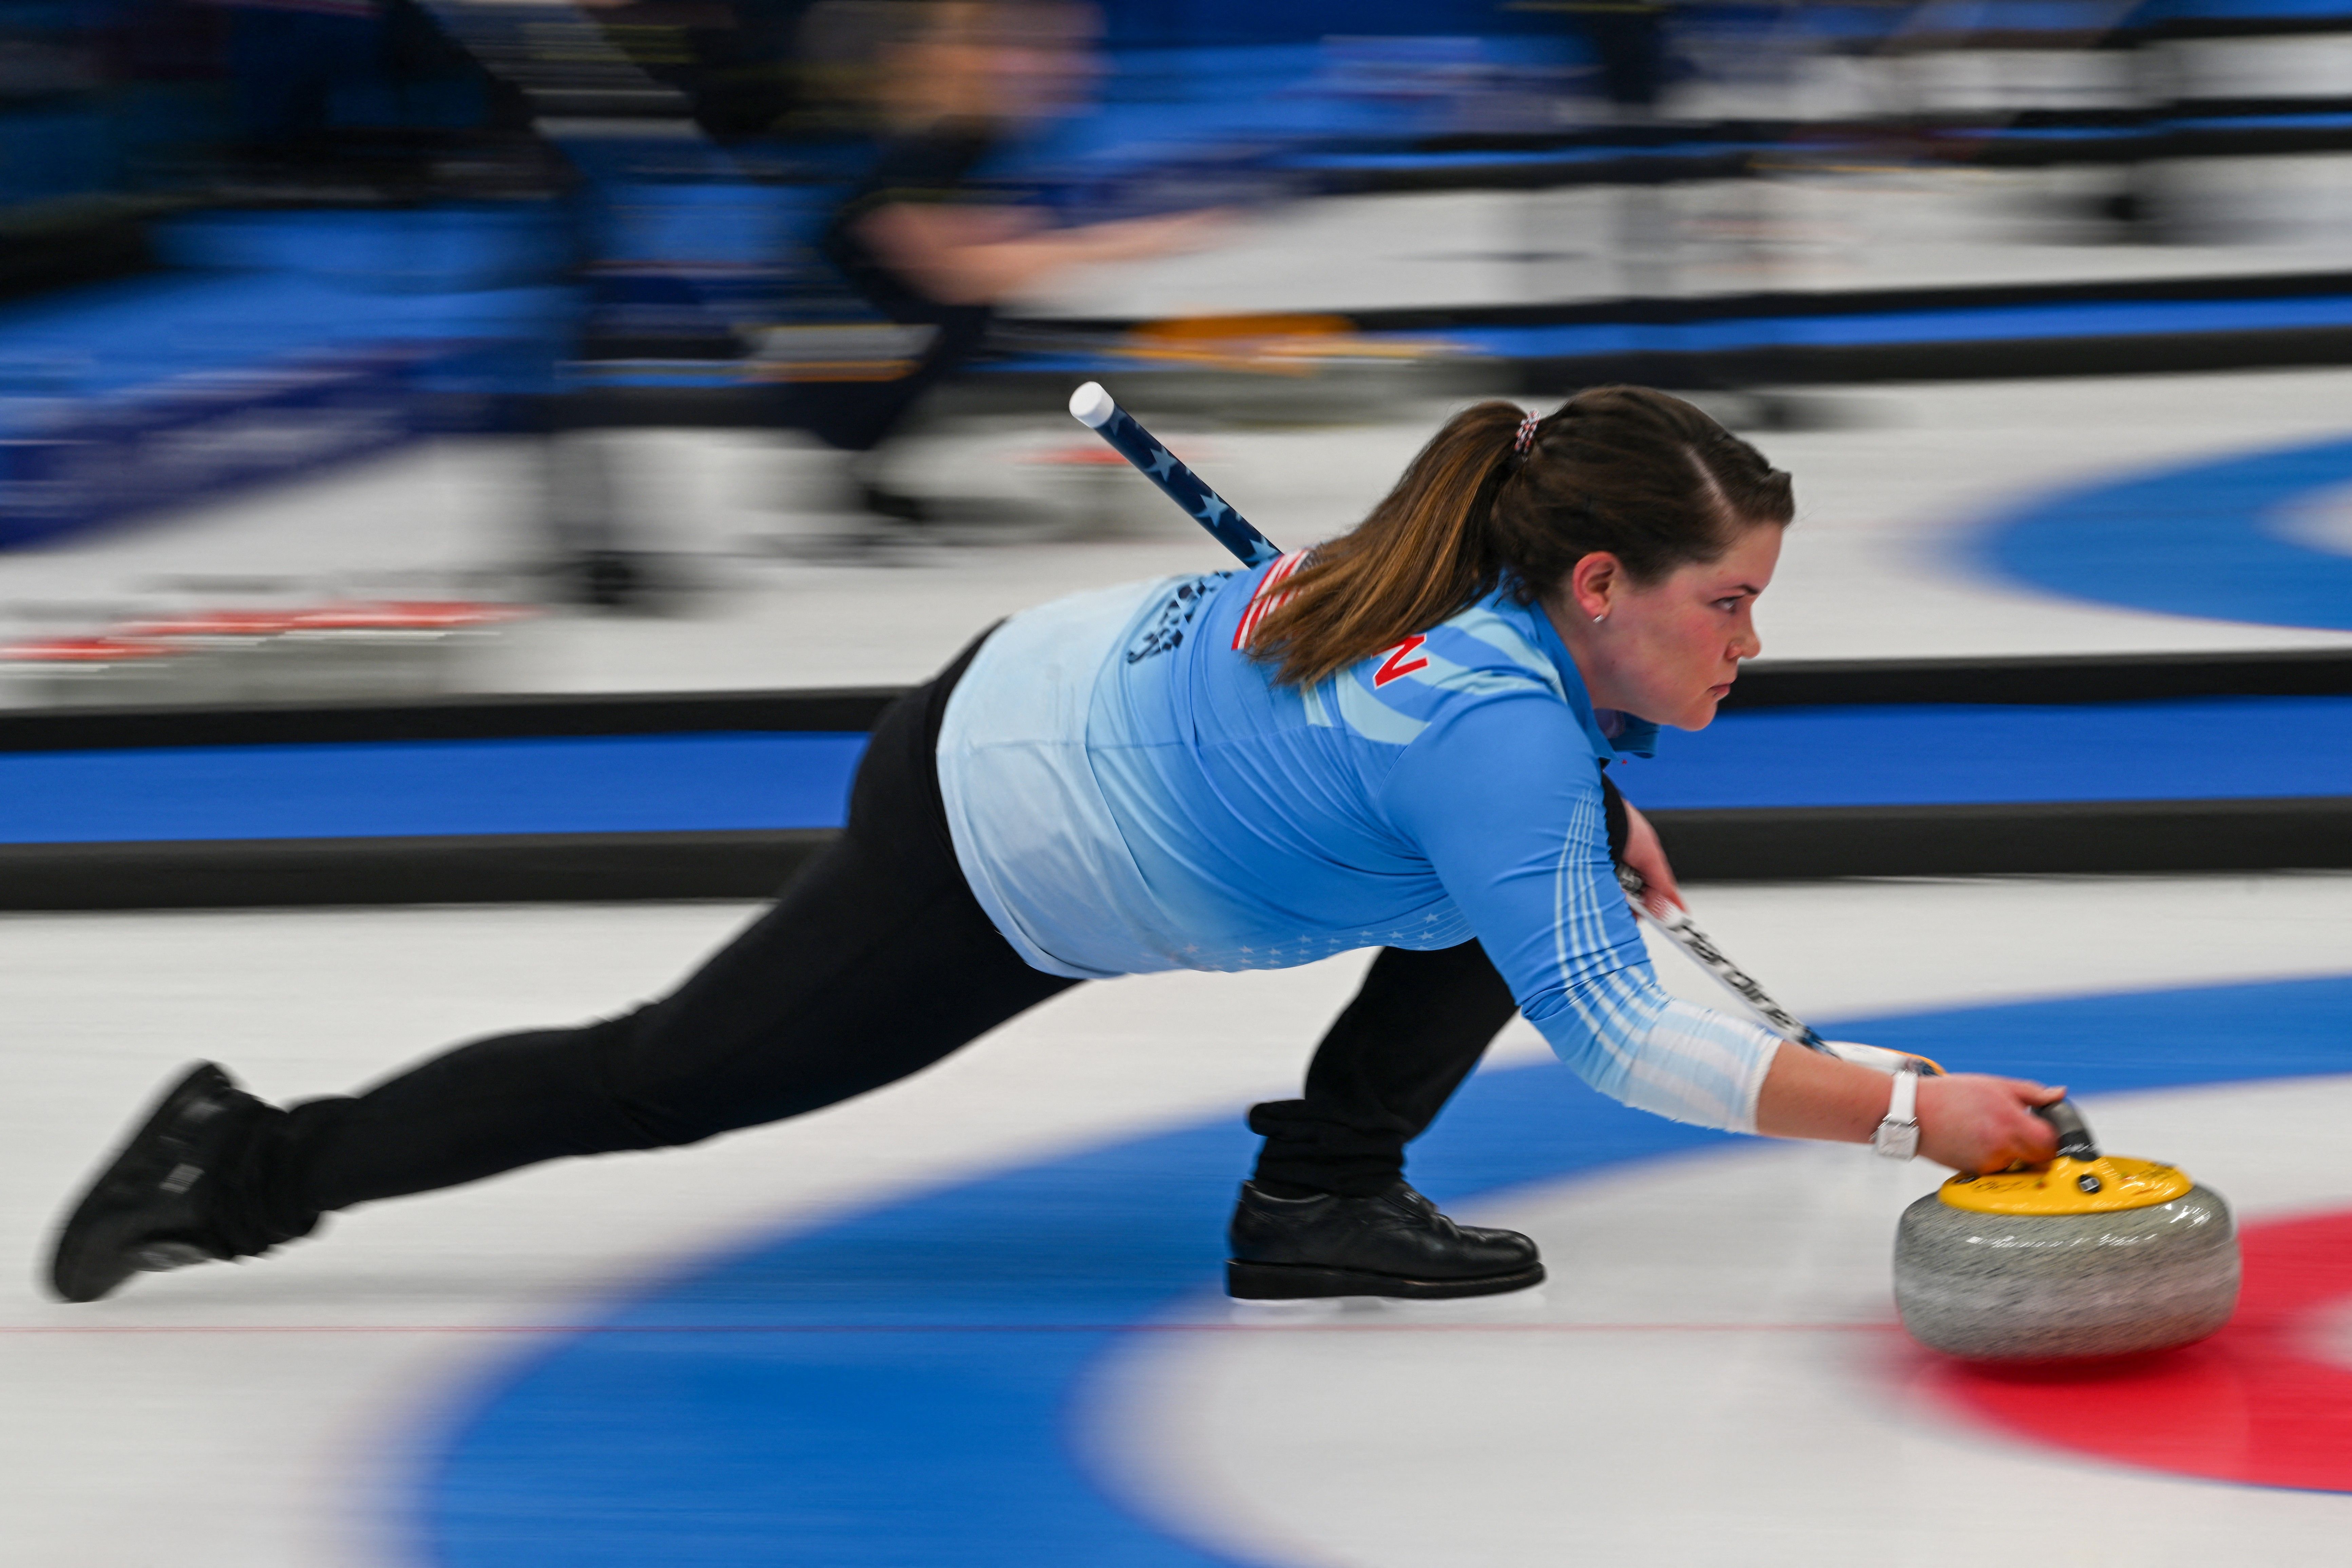  Rebecca Hamilton of the US curls the stone during the women's round robin session 1 game of the Beijing 2022 Winter Olympic Games curling competition